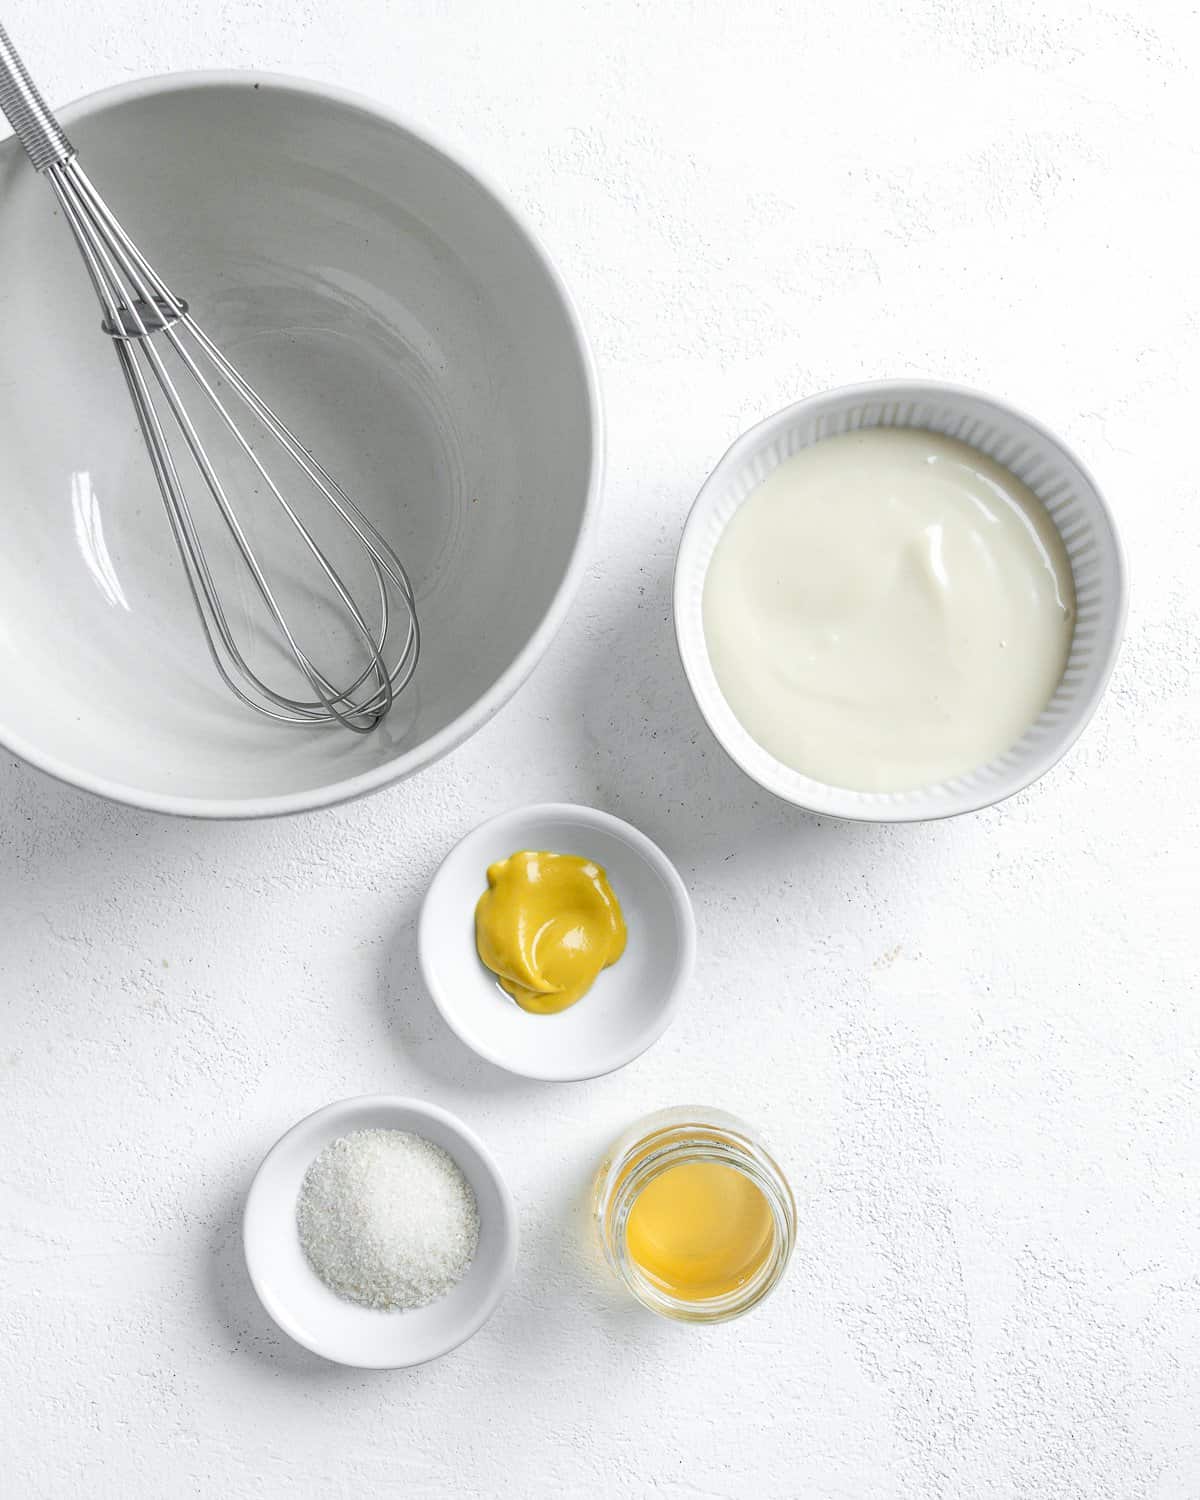 measured out condiments in small white bowls alongside mixing bowl and mixer utensil against white surface